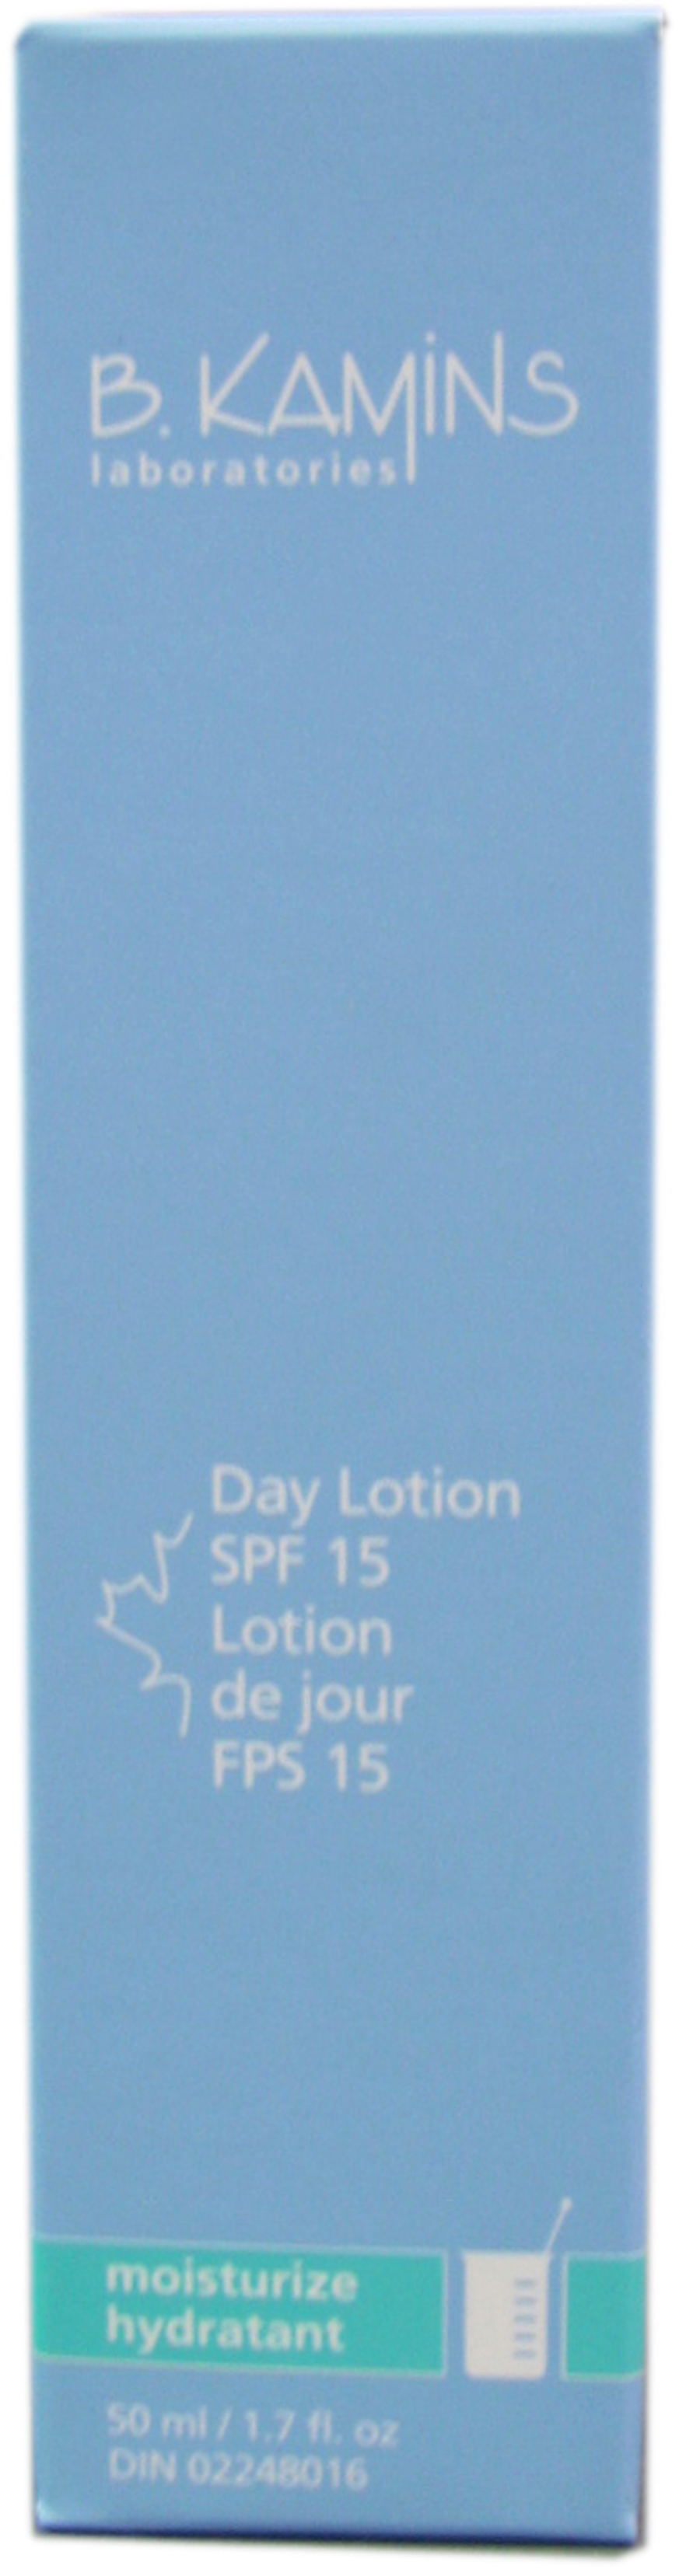 Day Lotion front panel image